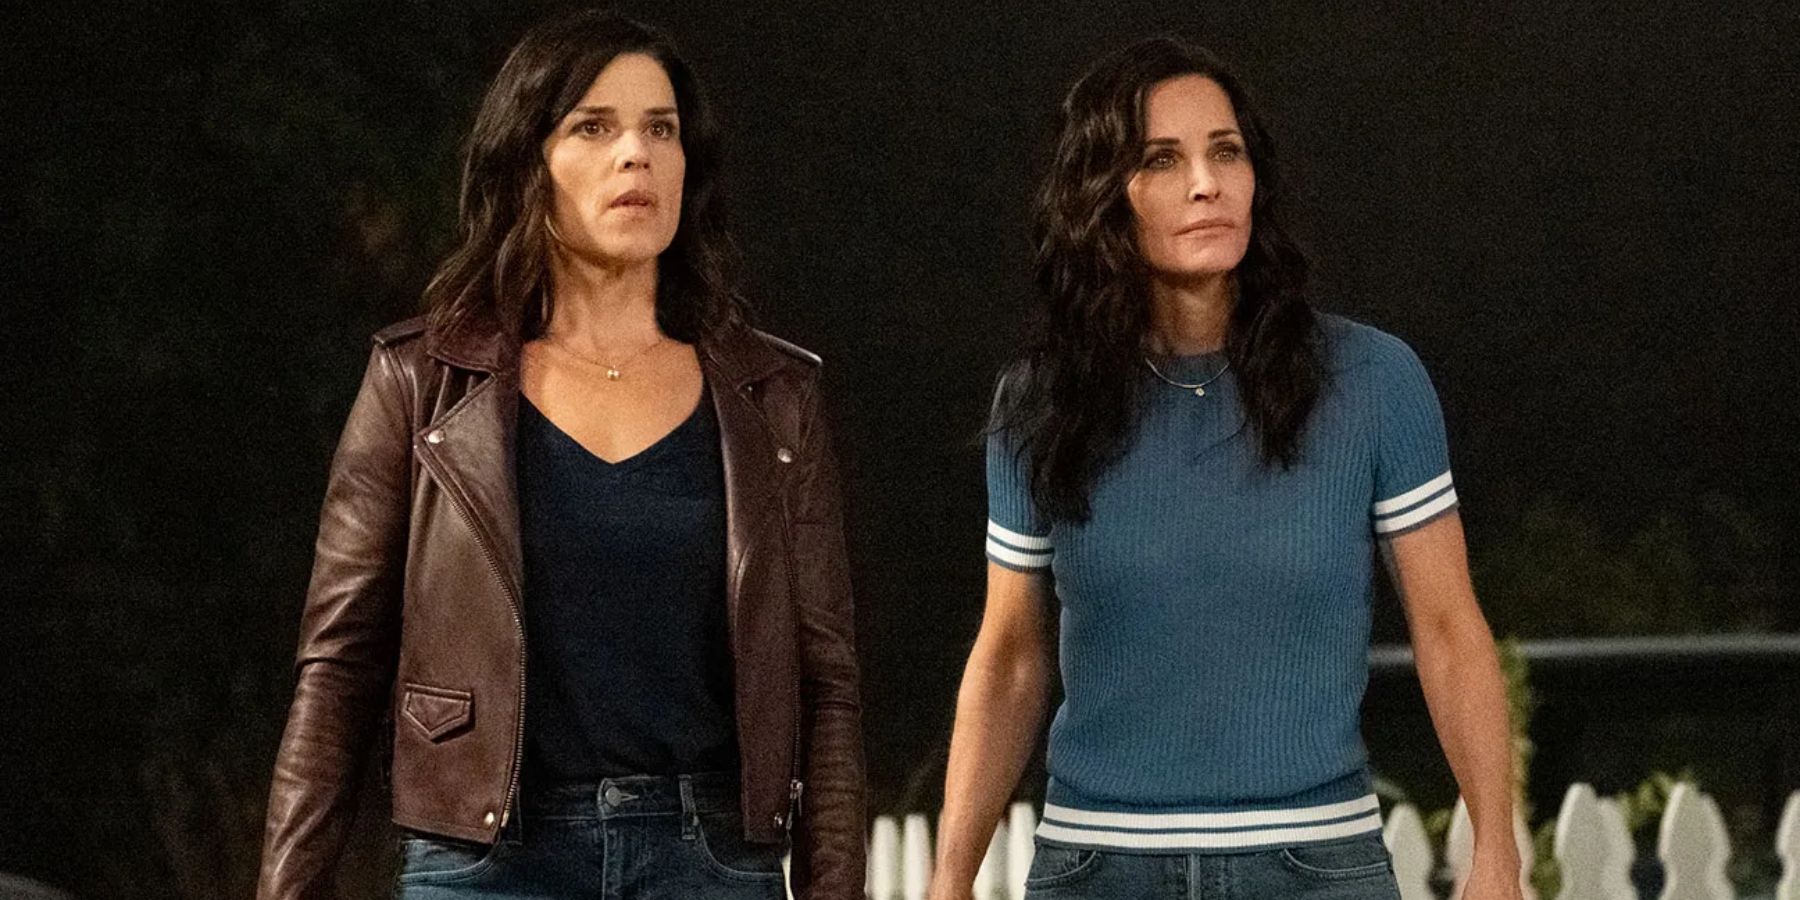 Sidney Prescott (Neve Campbell) and Gale Weathers (Courteney Cox) in Scream (2022)